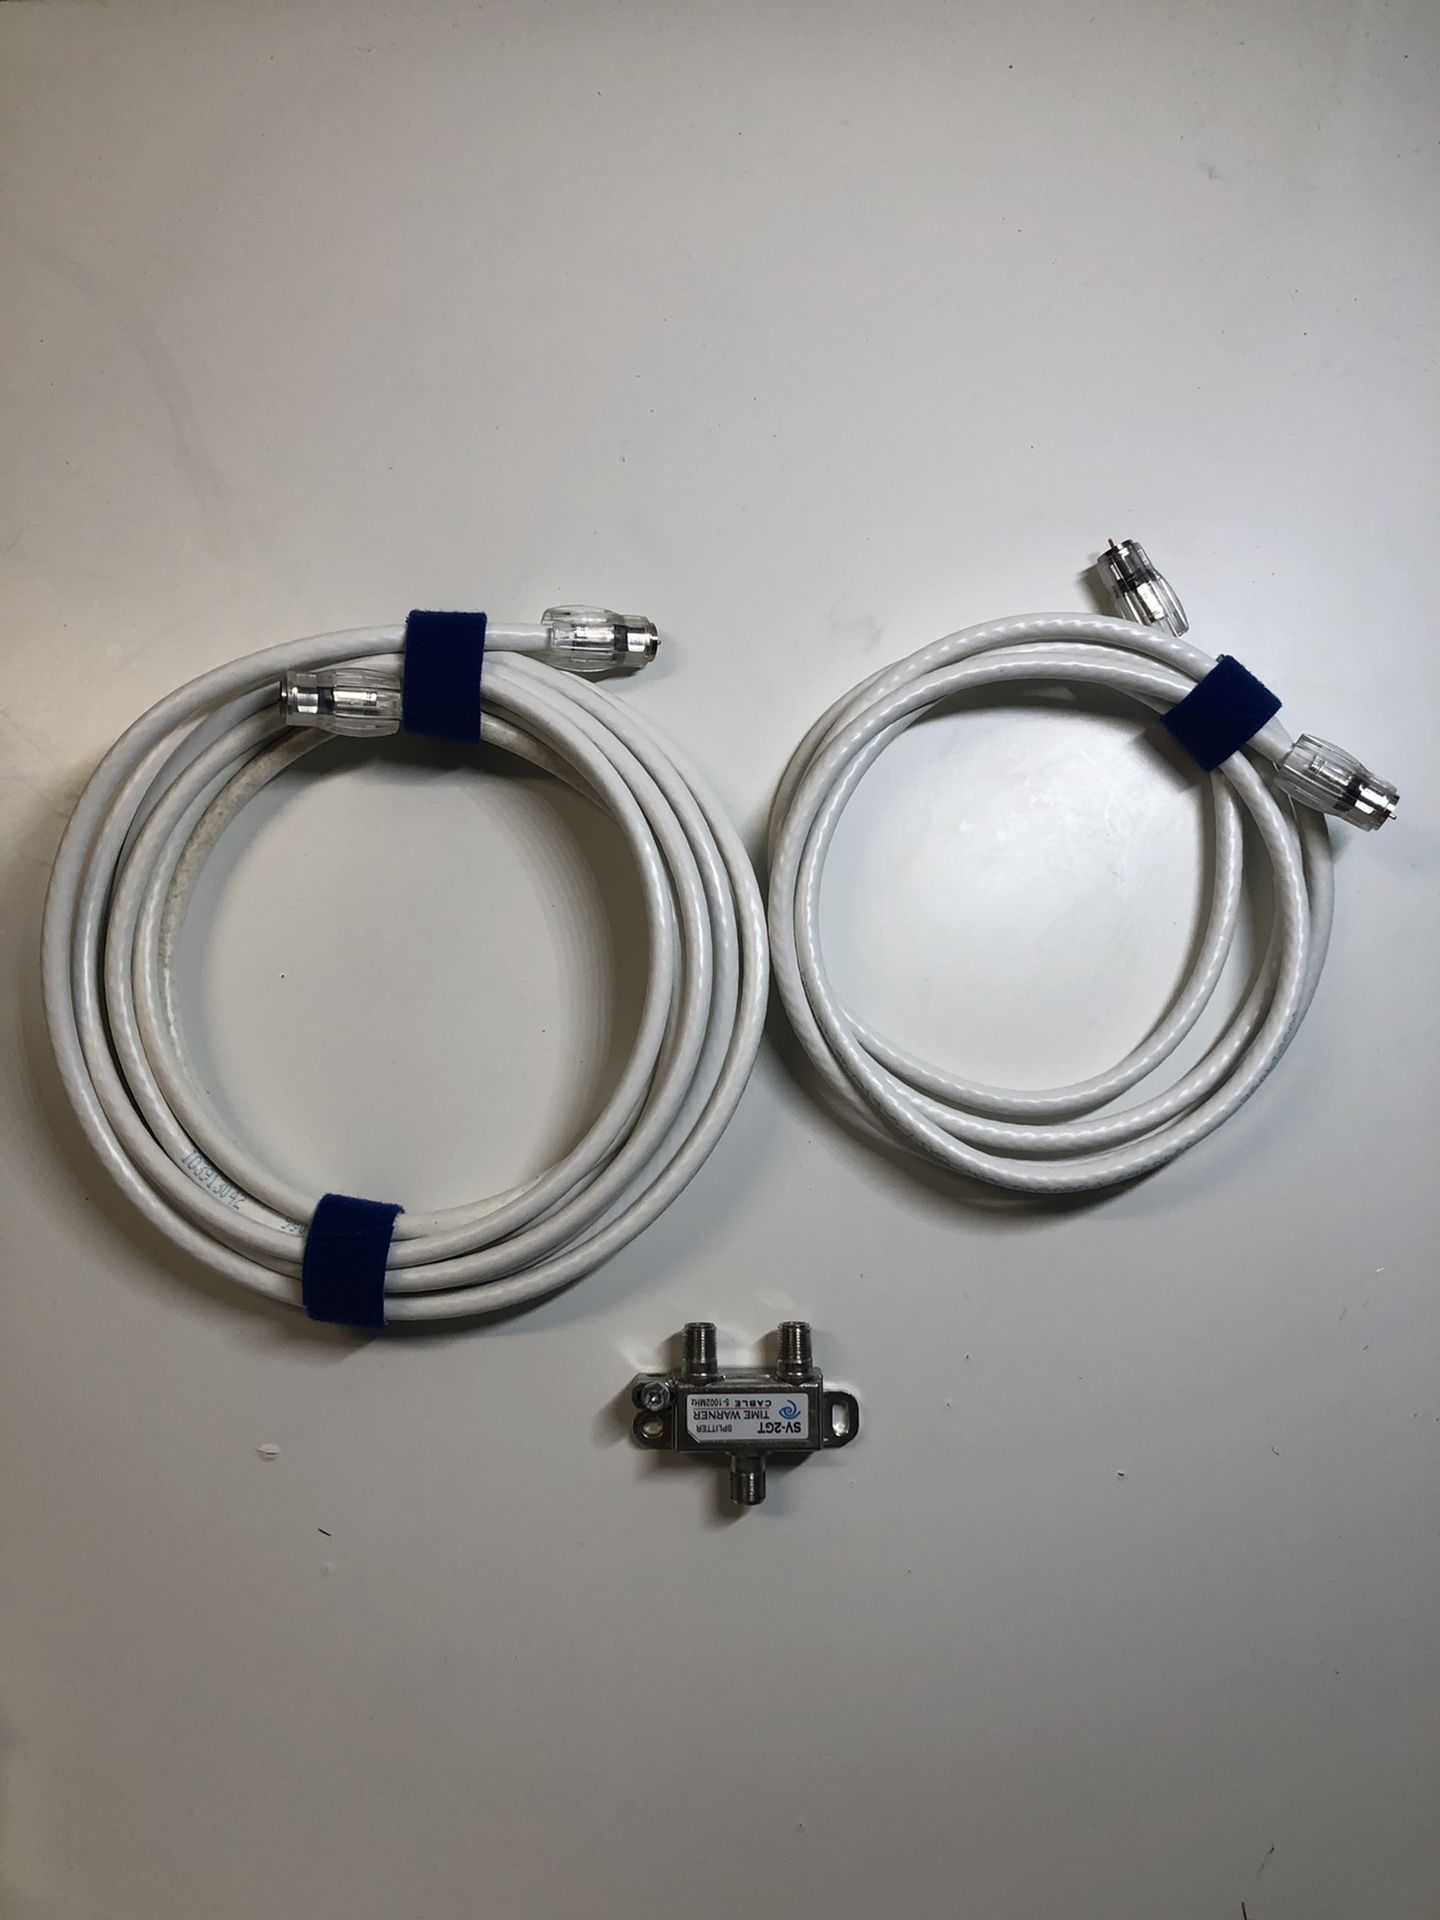 Coaxial cables and splitter